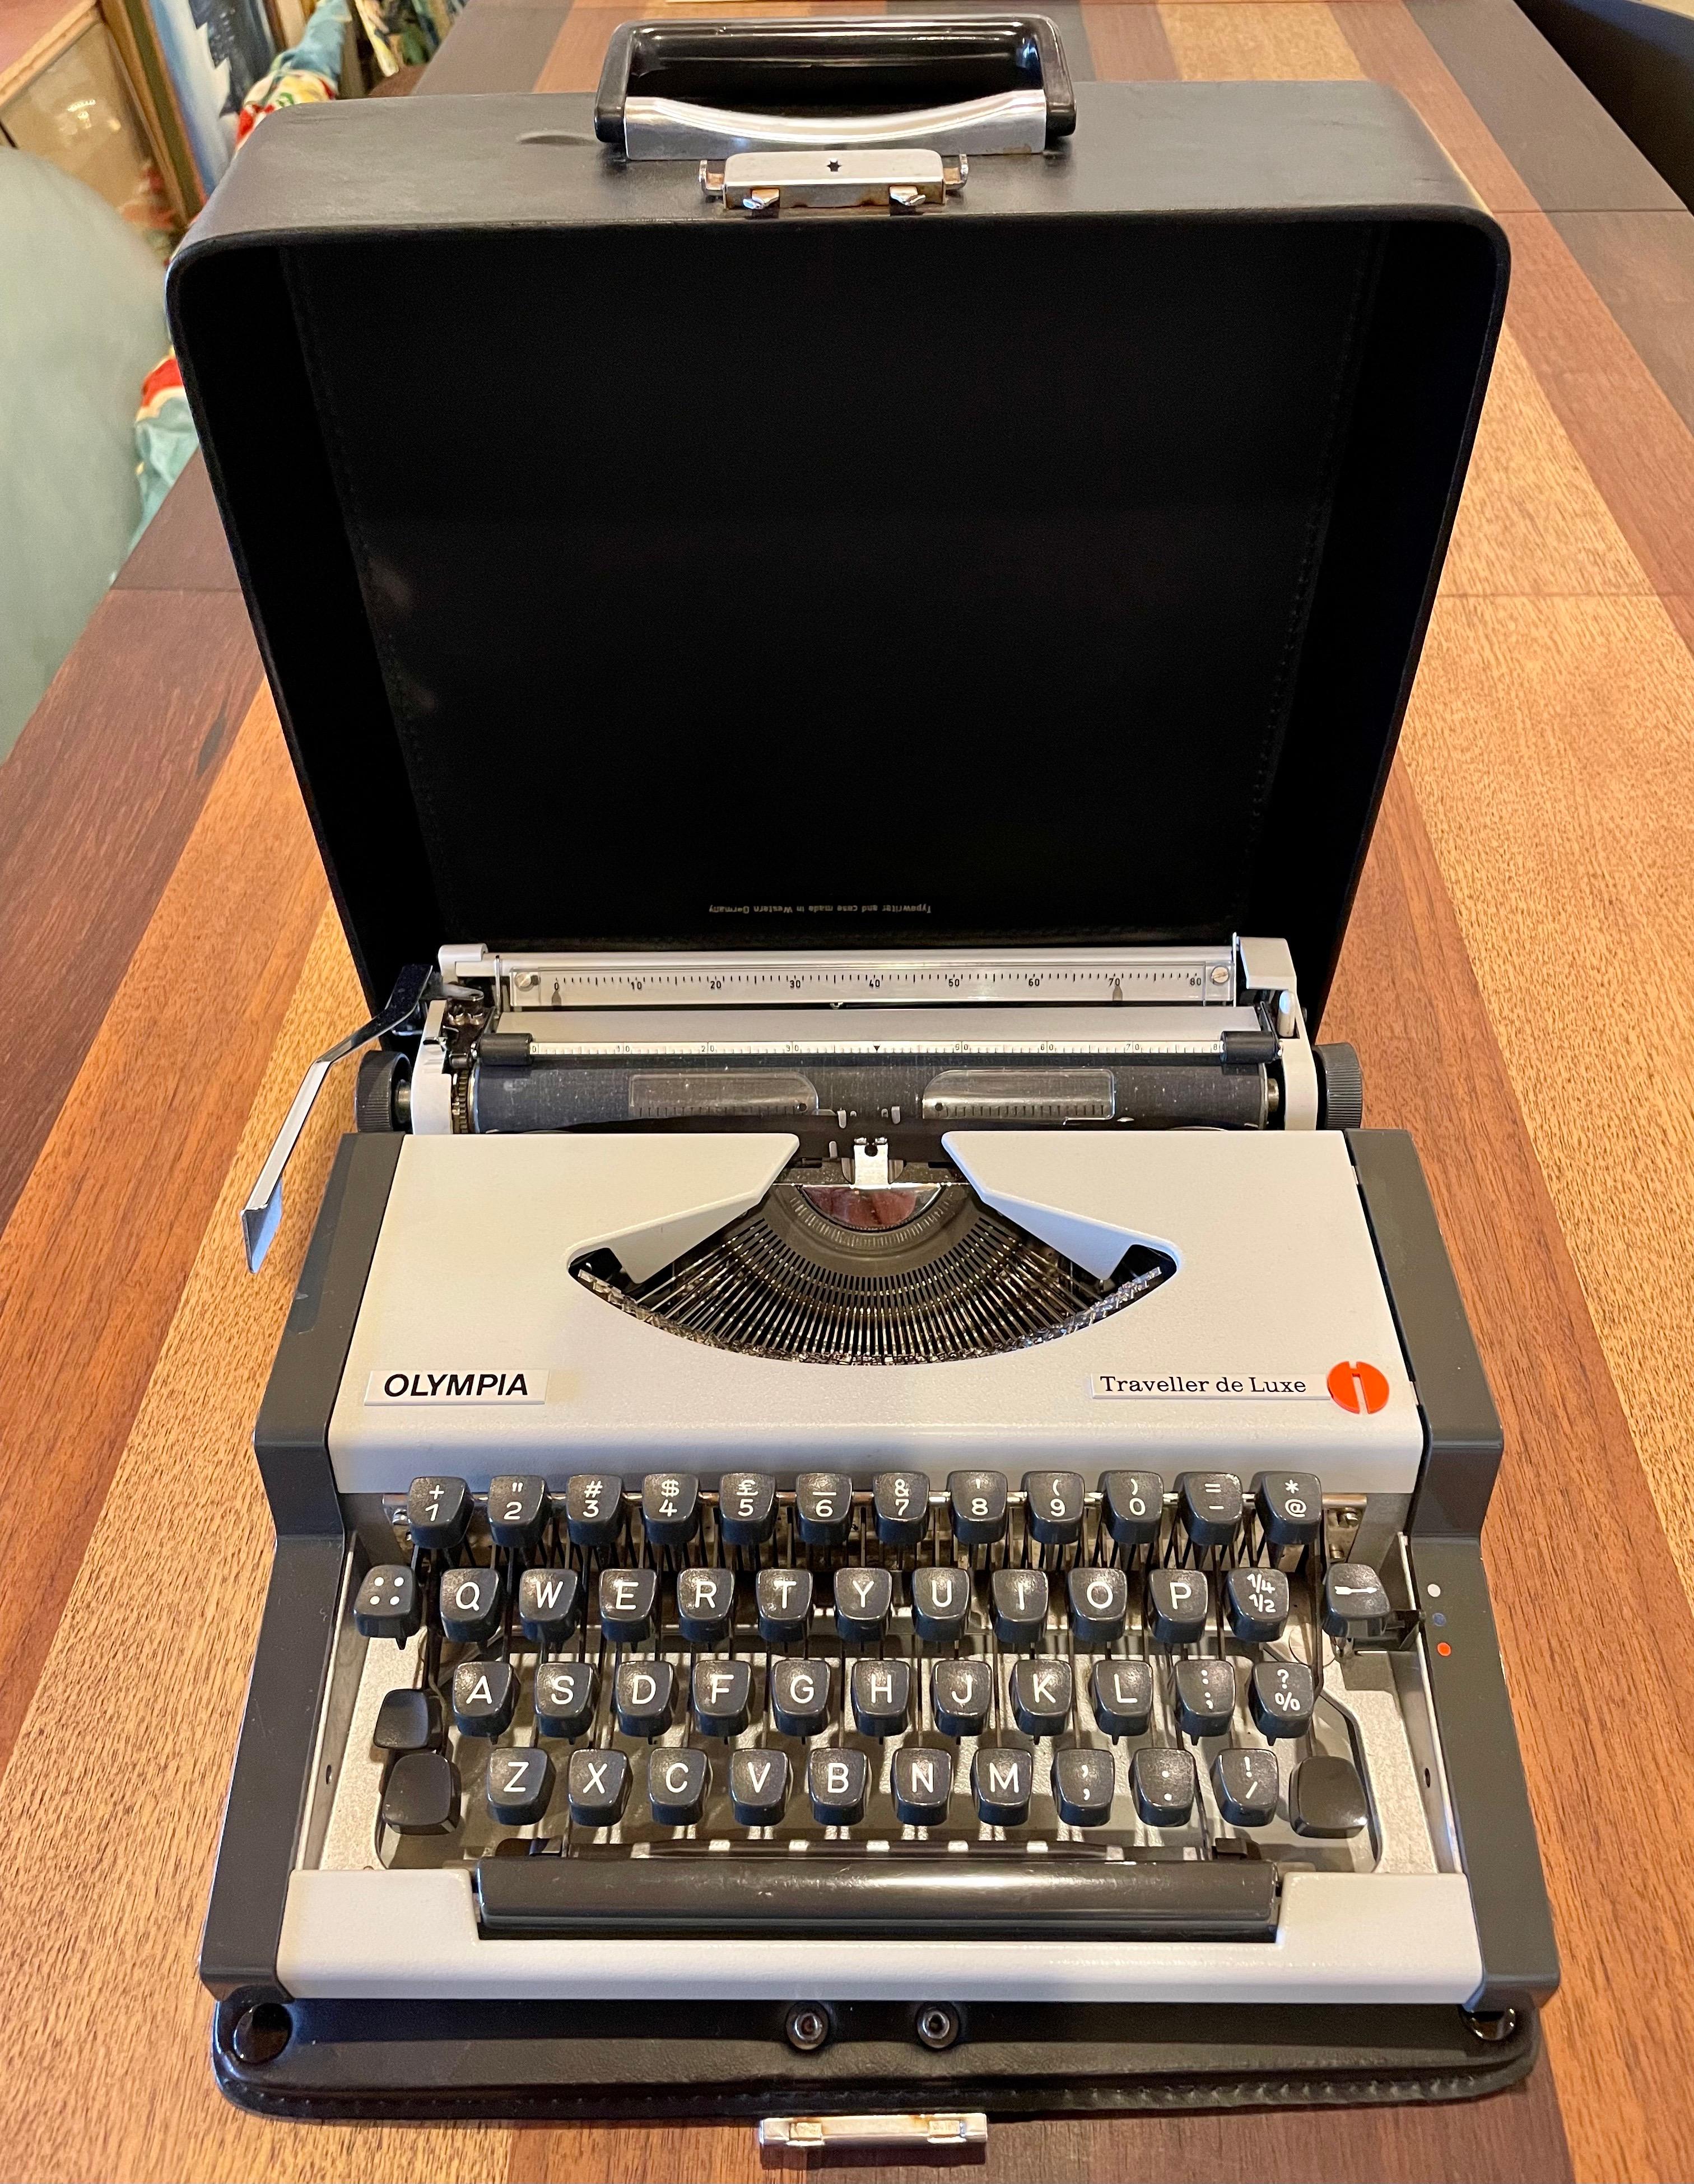 German Olympia Typewriter Traveller De Luxe in Working Condition with Case